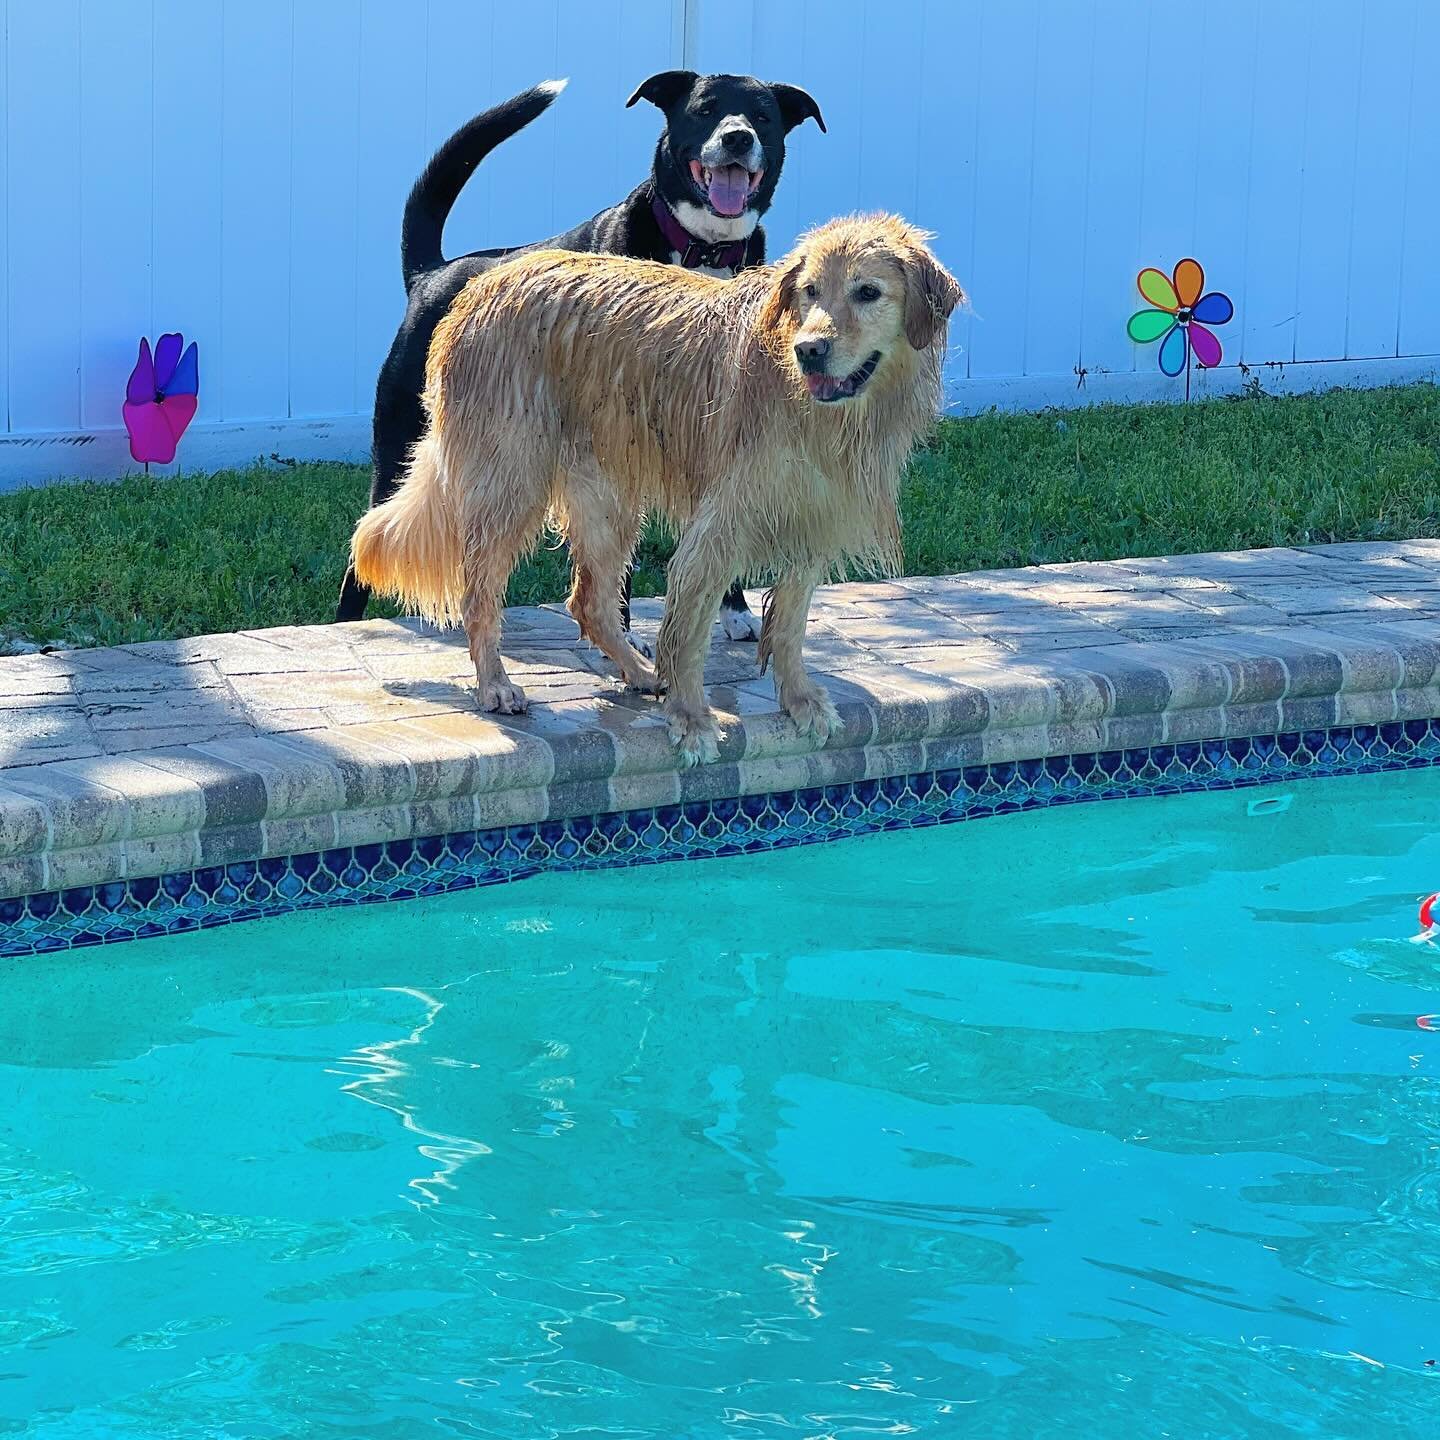 Totally TWOsday with Sadie &amp; Daisy🩵🩷

Sadie is Daisy&rsquo;s biggest cheerleader📣&amp; frolics around the yard while Daisy gets her fitness swimming on🐠🤪👙

Clients are always welcome to bring all of their fur babies, even the ones who don&r